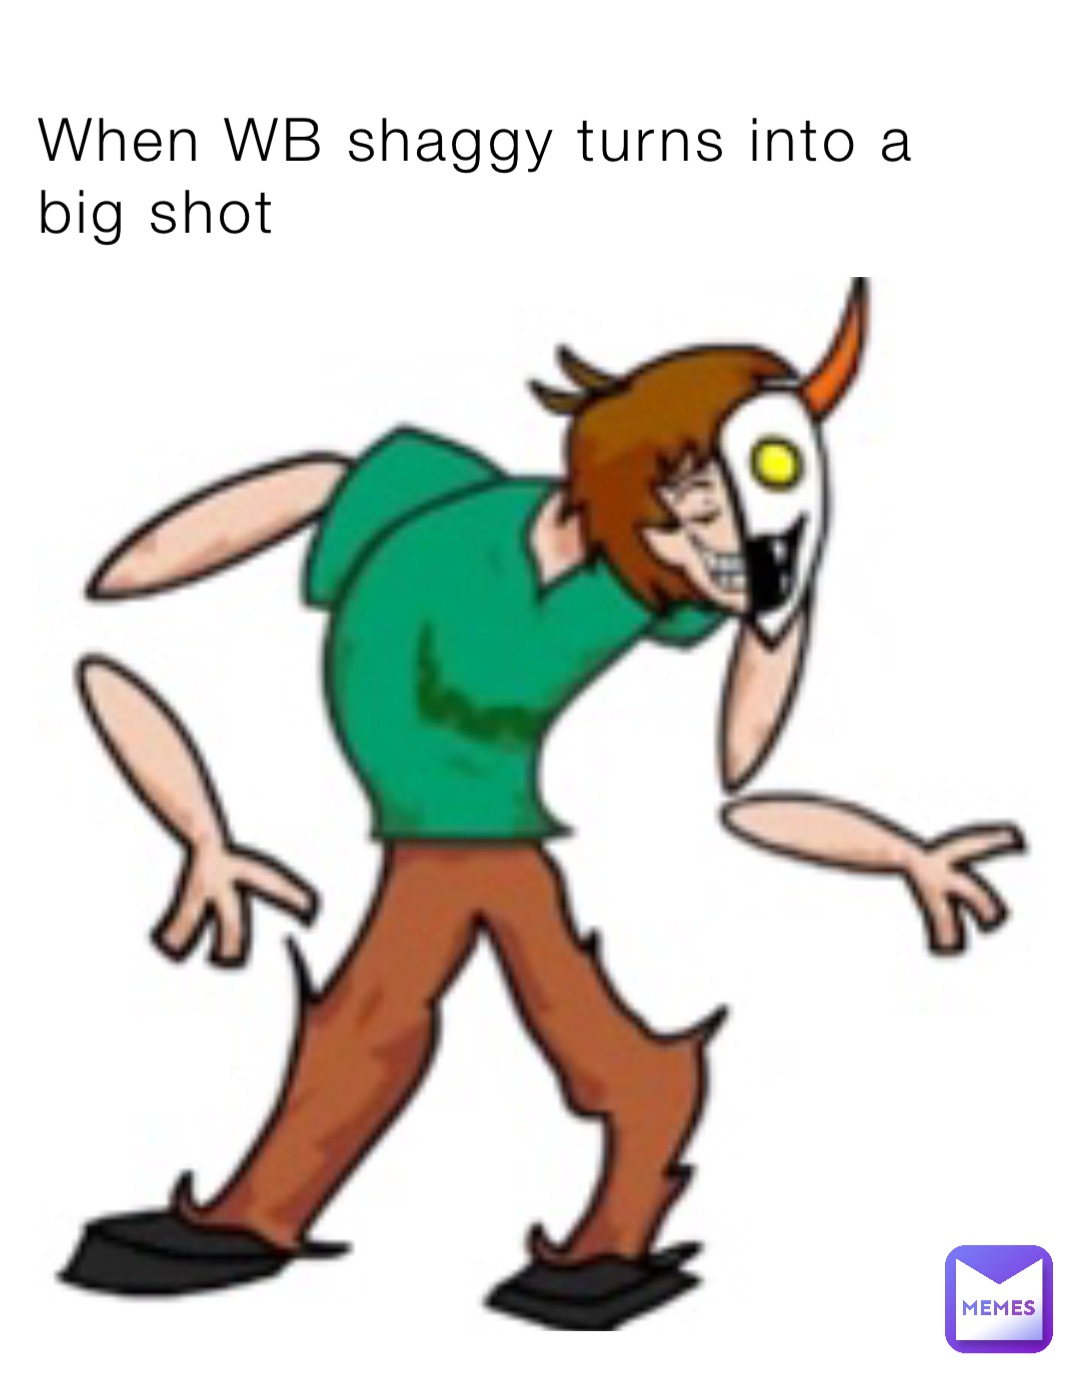 When WB shaggy turns into a big shot